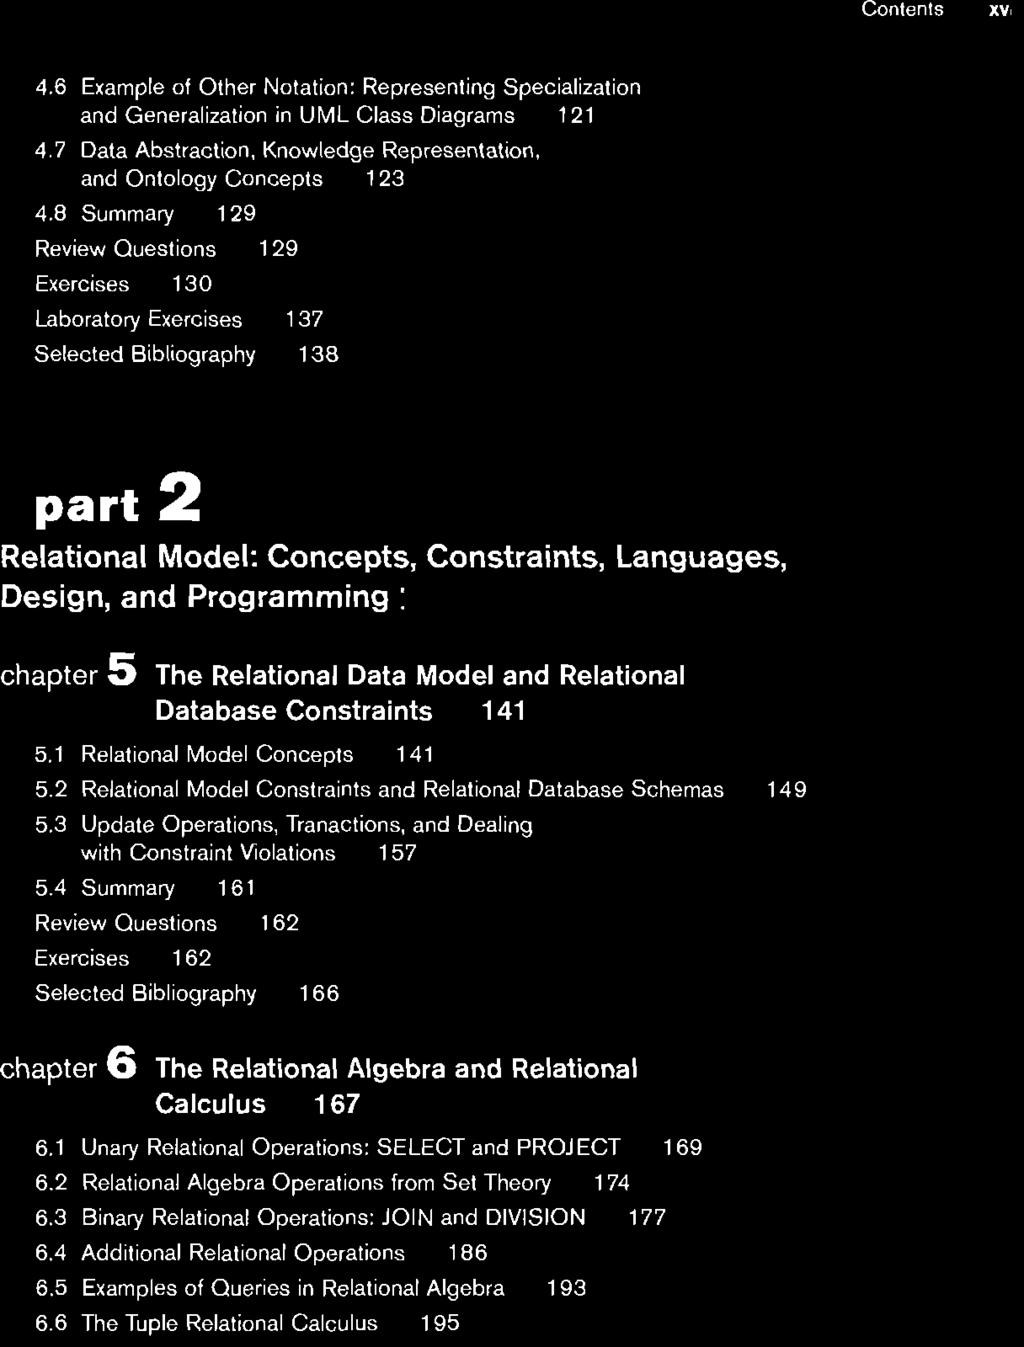 8 Summary 129 Review Questions 129 Exercises 130 Laboratory Exercises 137 Selected Bibliography 138 npart 2 Relational Model: Concepts, Constraints, Languages, Design, and Programming H chapter 5 The